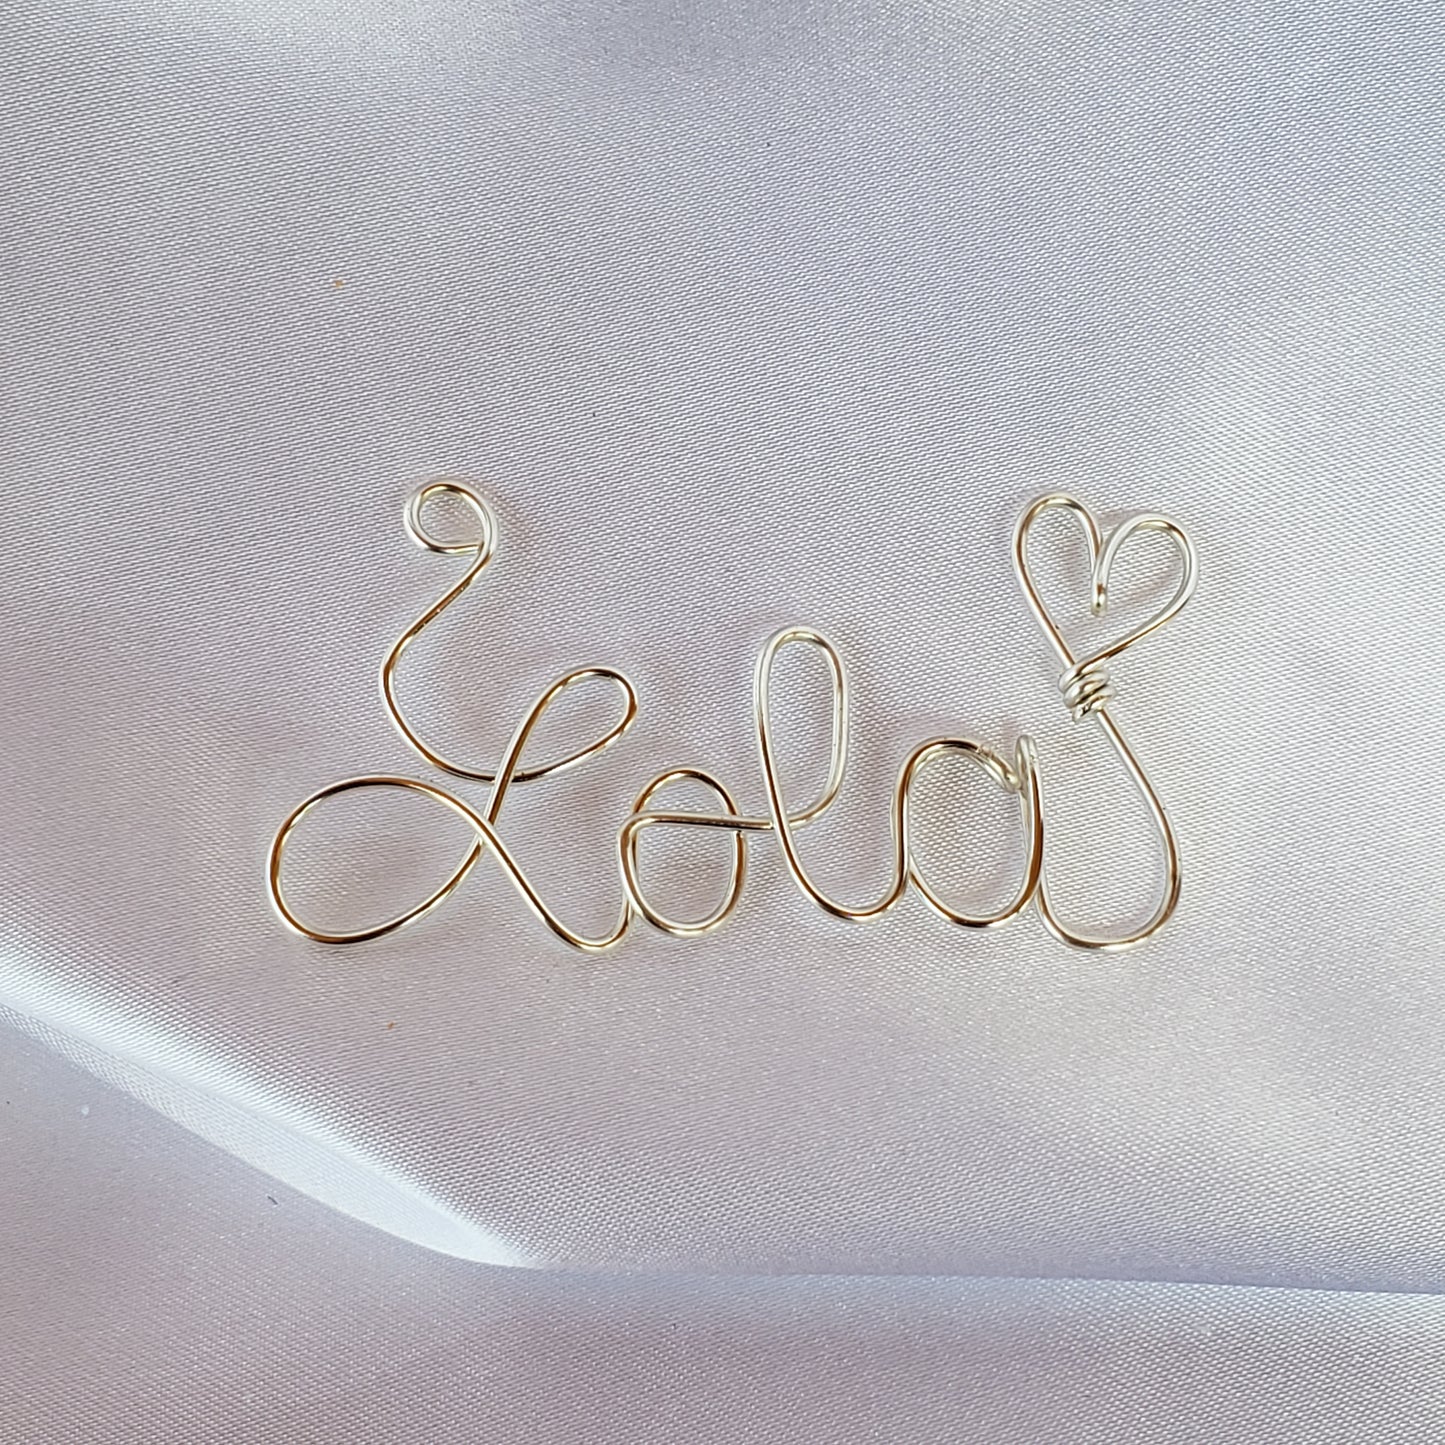 Wire wrapped name necklace